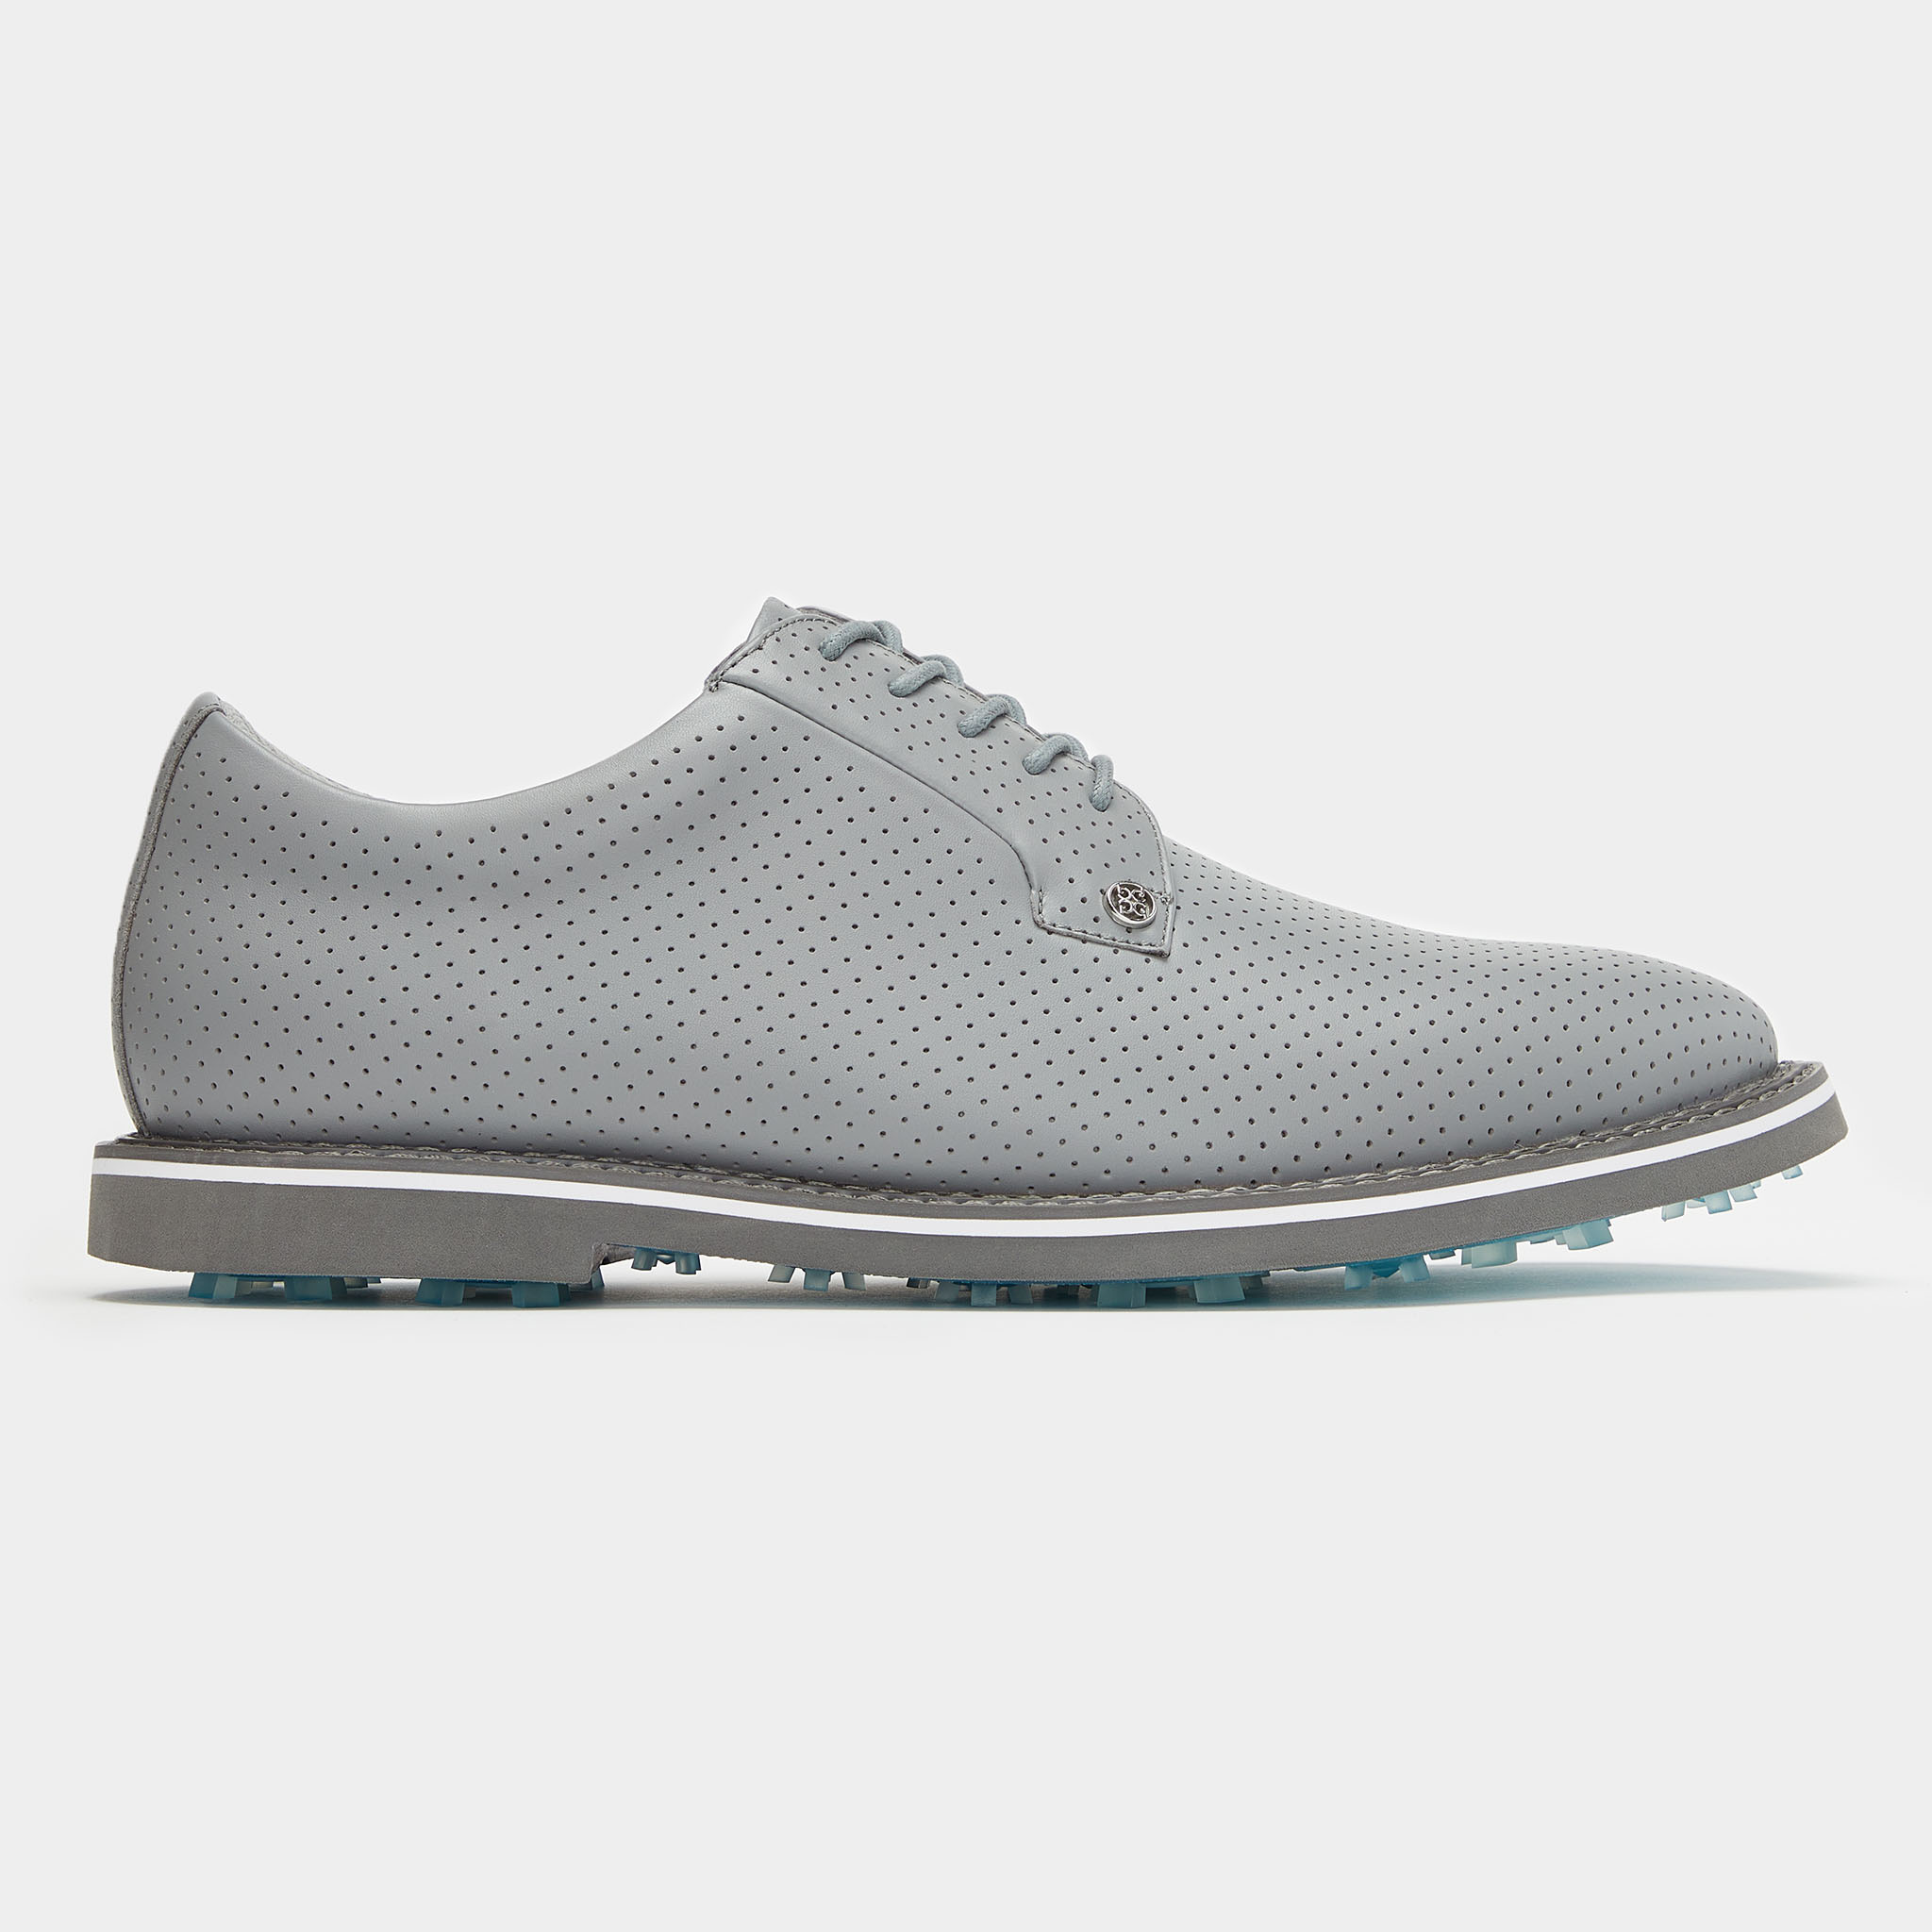 MEN'S GALLIVANTER PERFORATED LEATHER GOLF SHOE | MEN'S GOLF SHOES | G/FORE